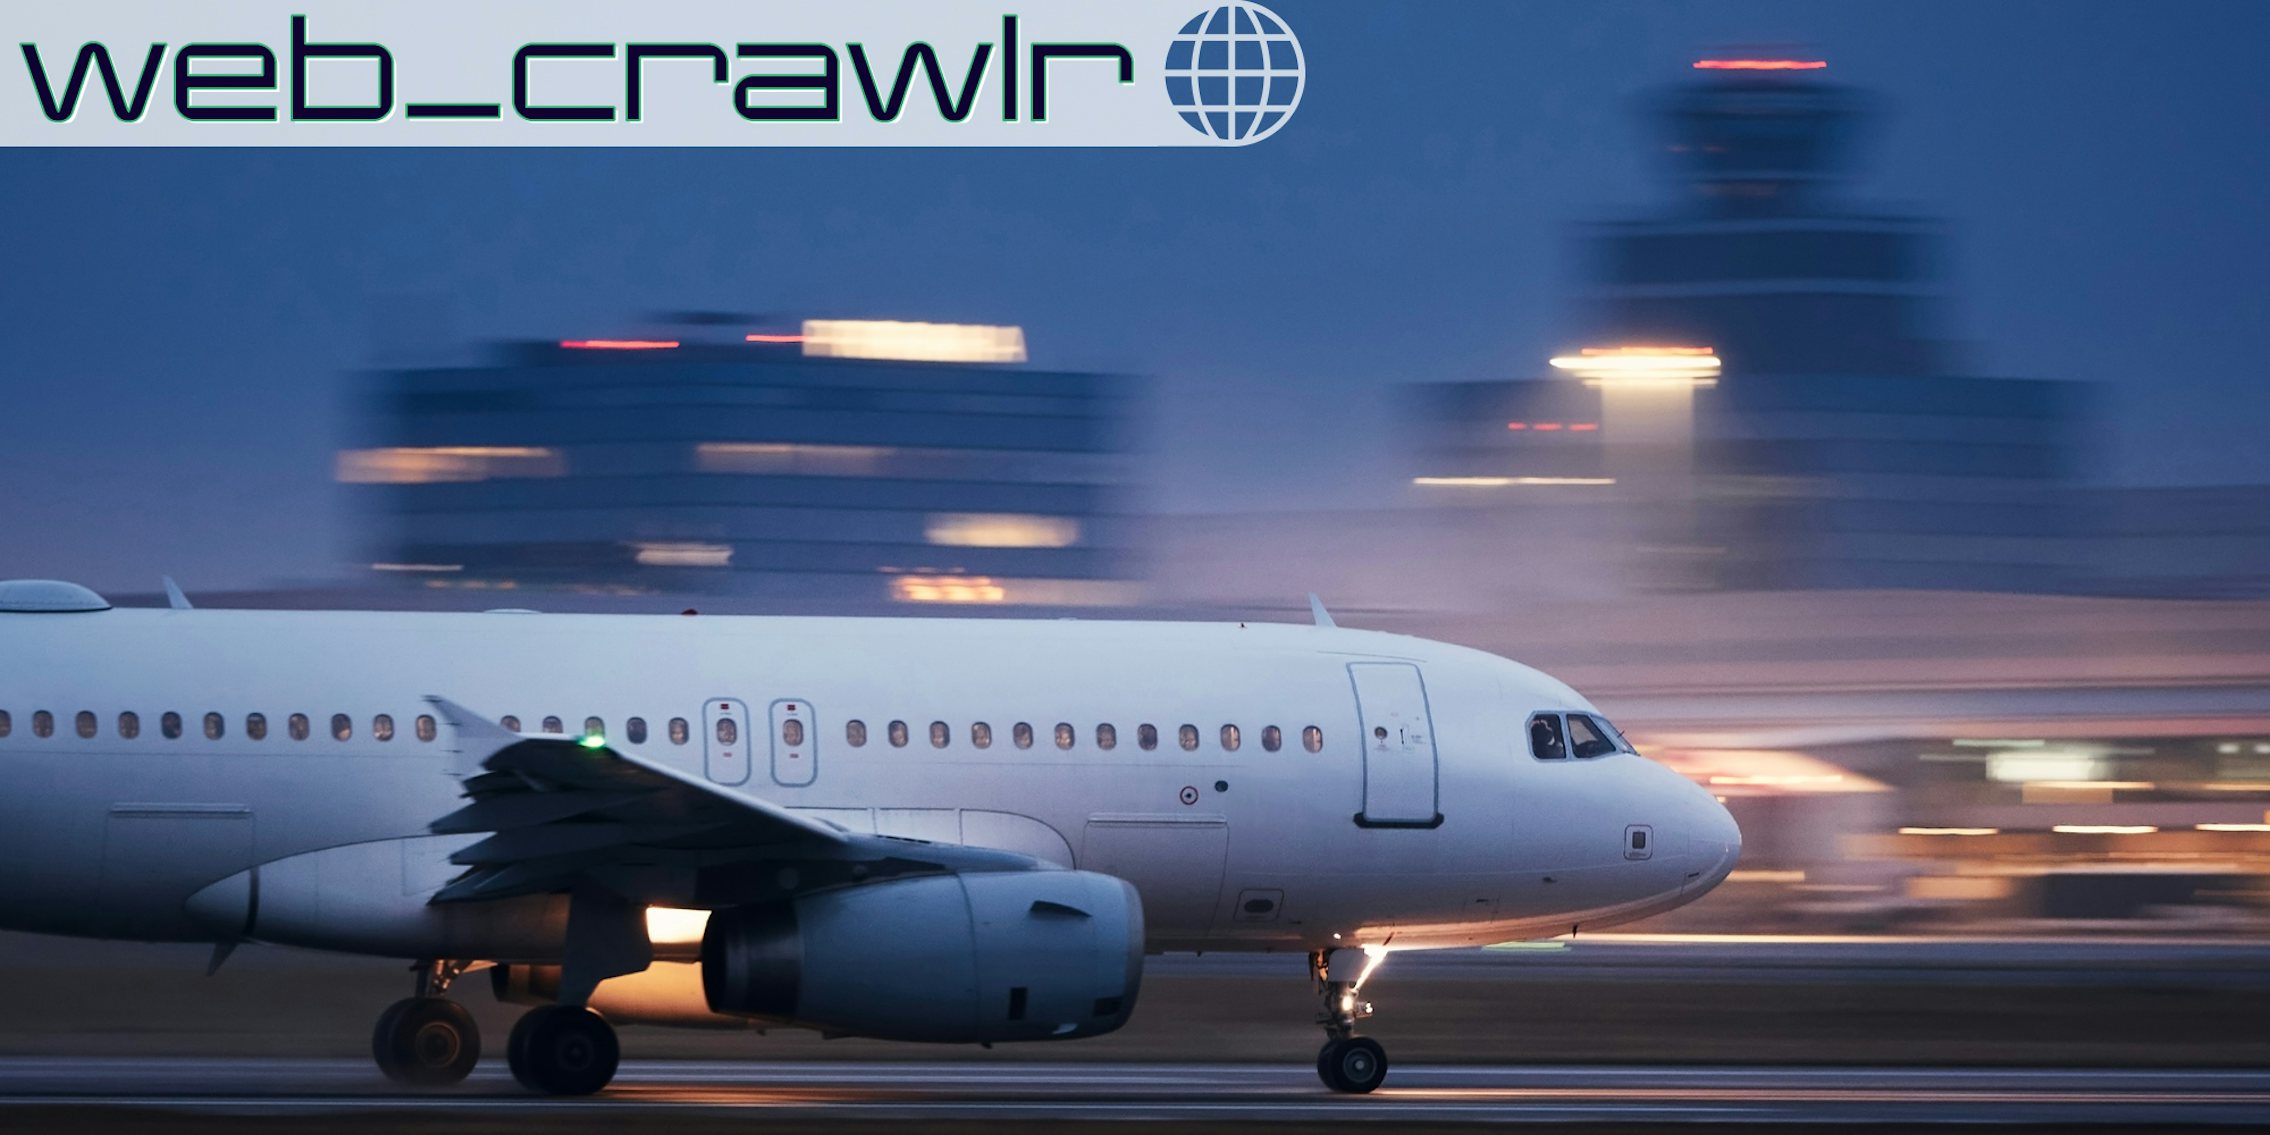 An airplane taking off. The Daily Dot newsletter web_crawlr logo is in the top left corner.